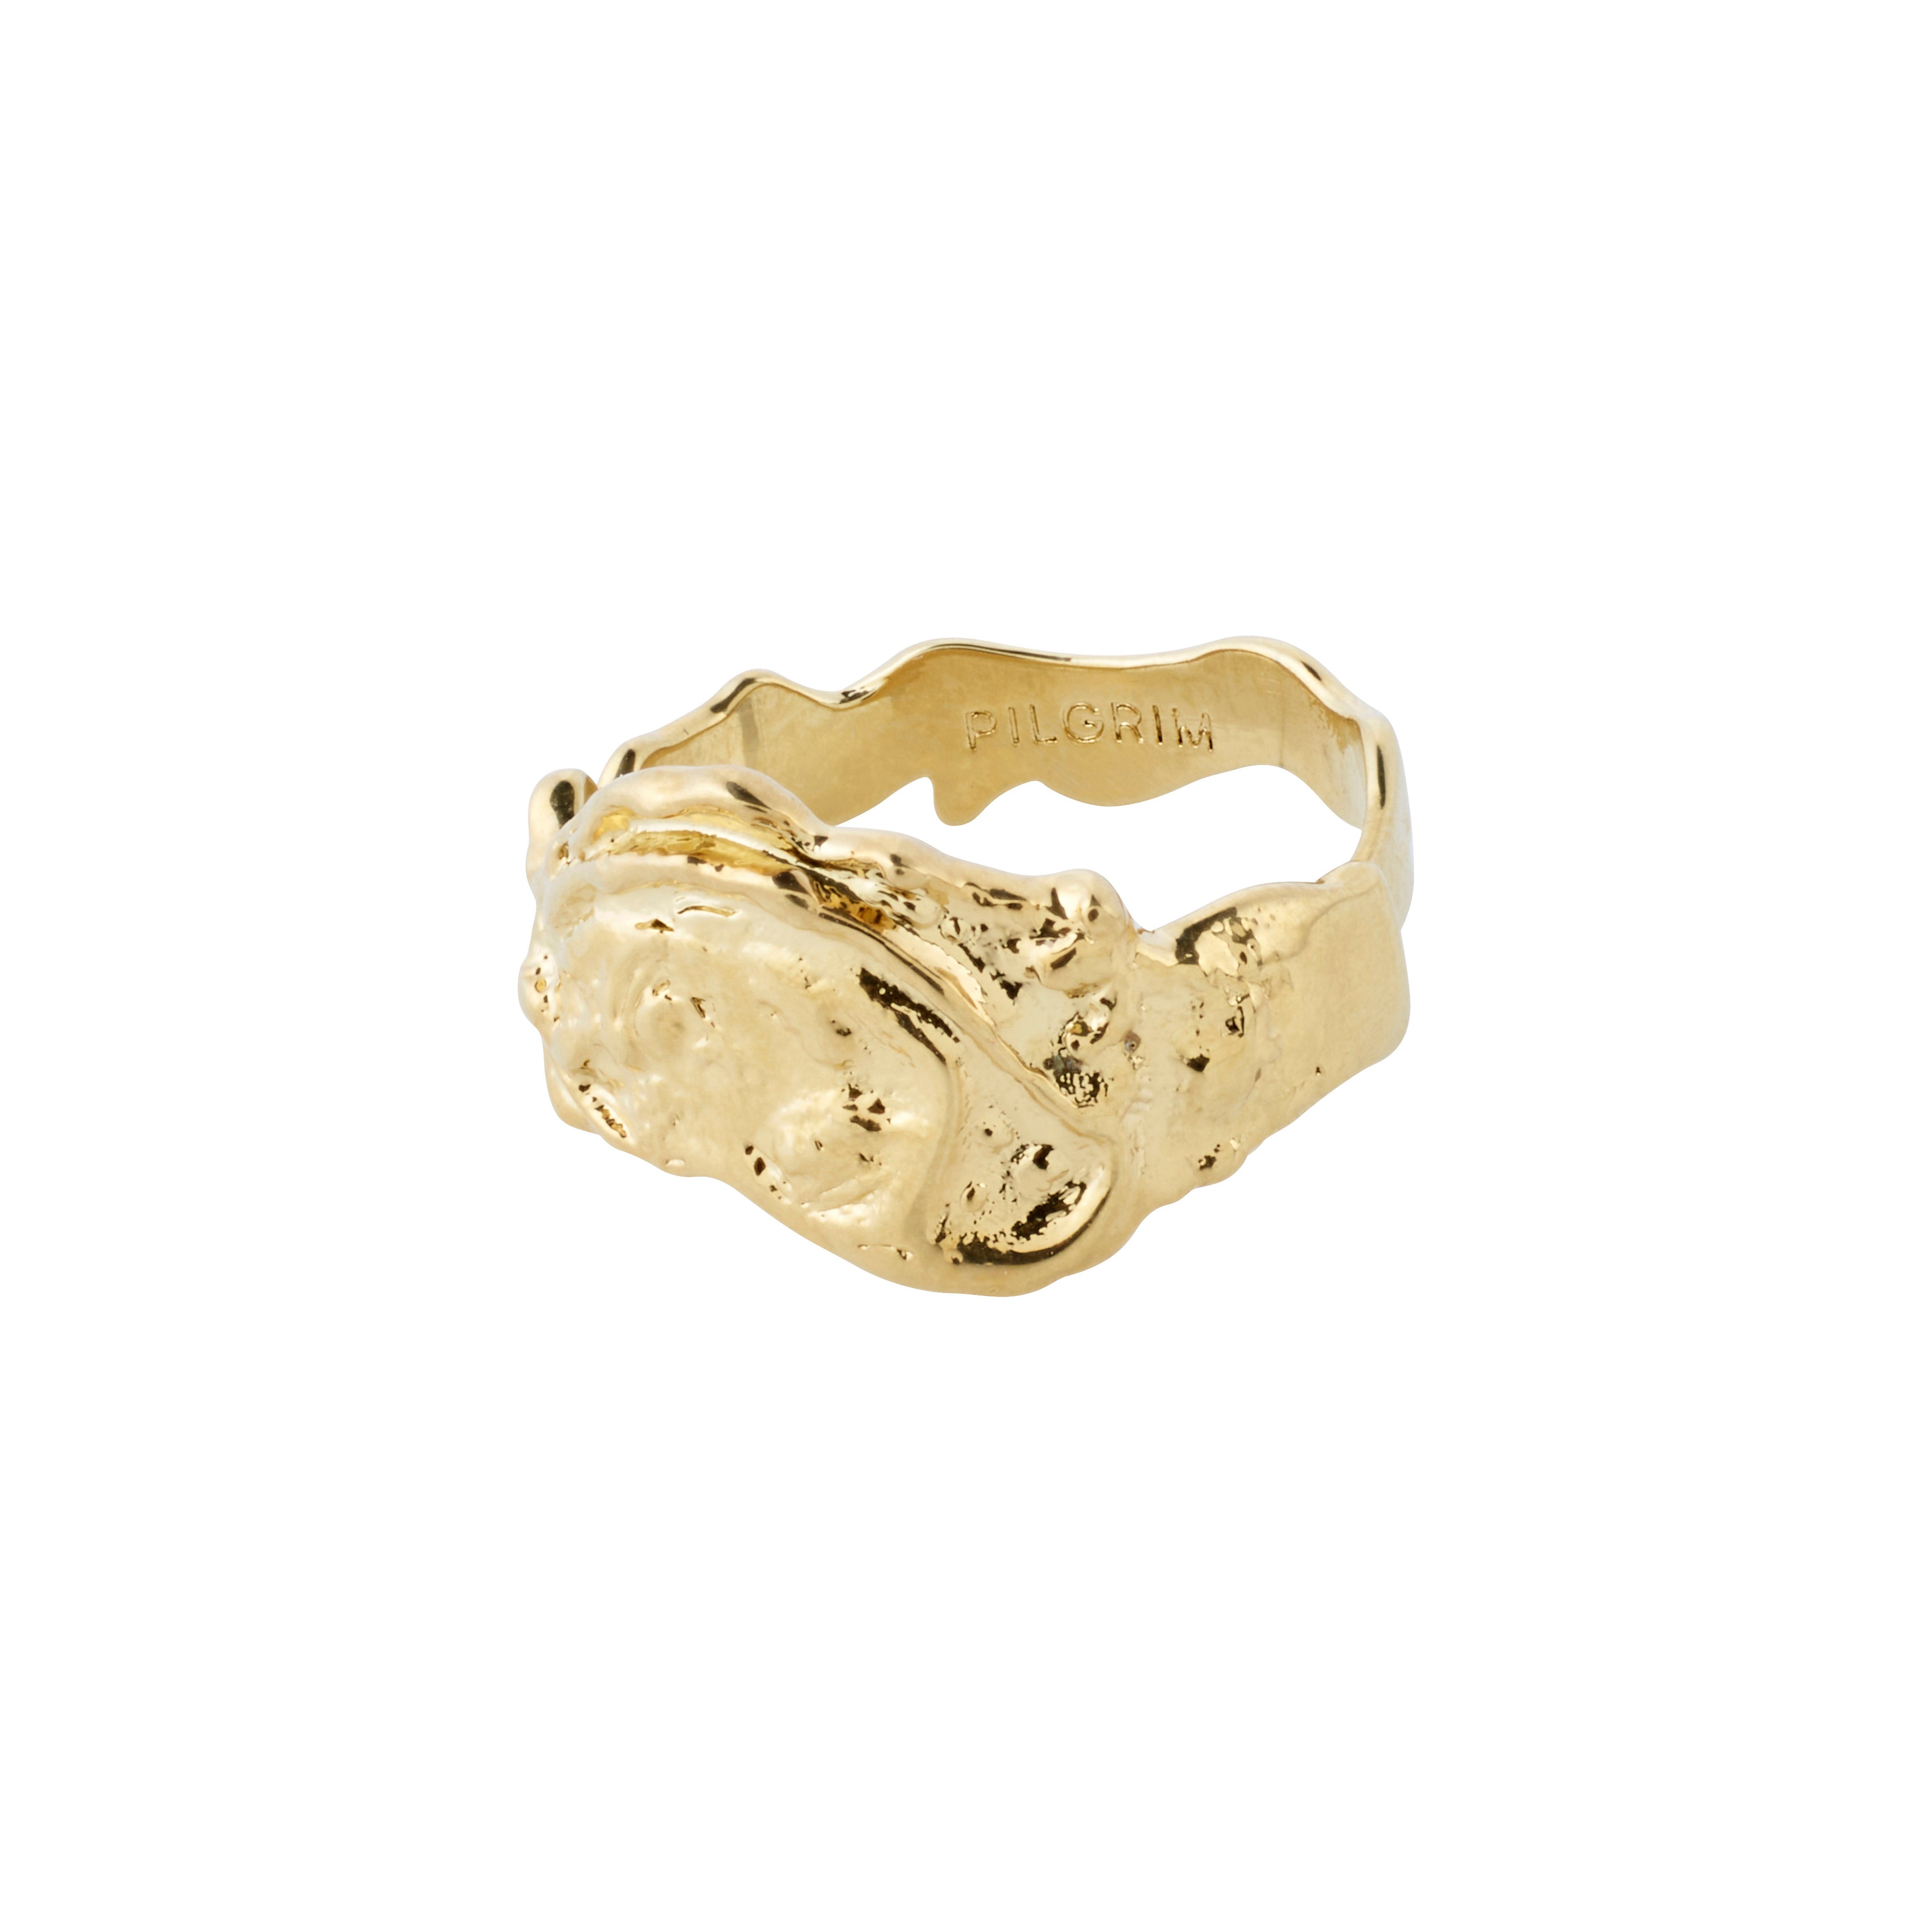 BLOSSOM recycled organic shaped ring gold-plated